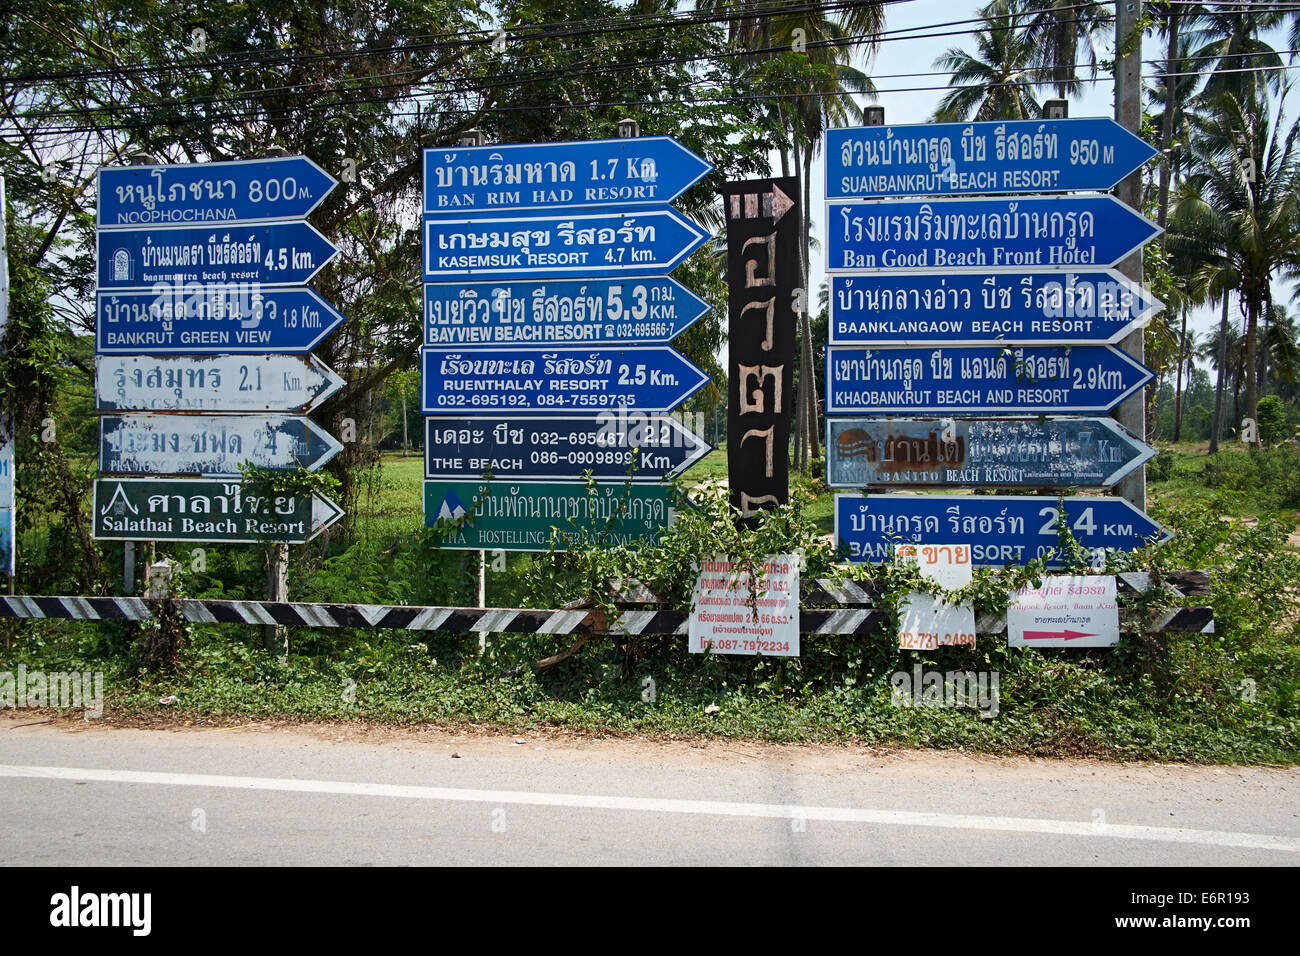 Thailand Ban Krut Resort in the Bang Saphan District Tourist signs with lists of hotel, activities and waymarkers Stock Photo